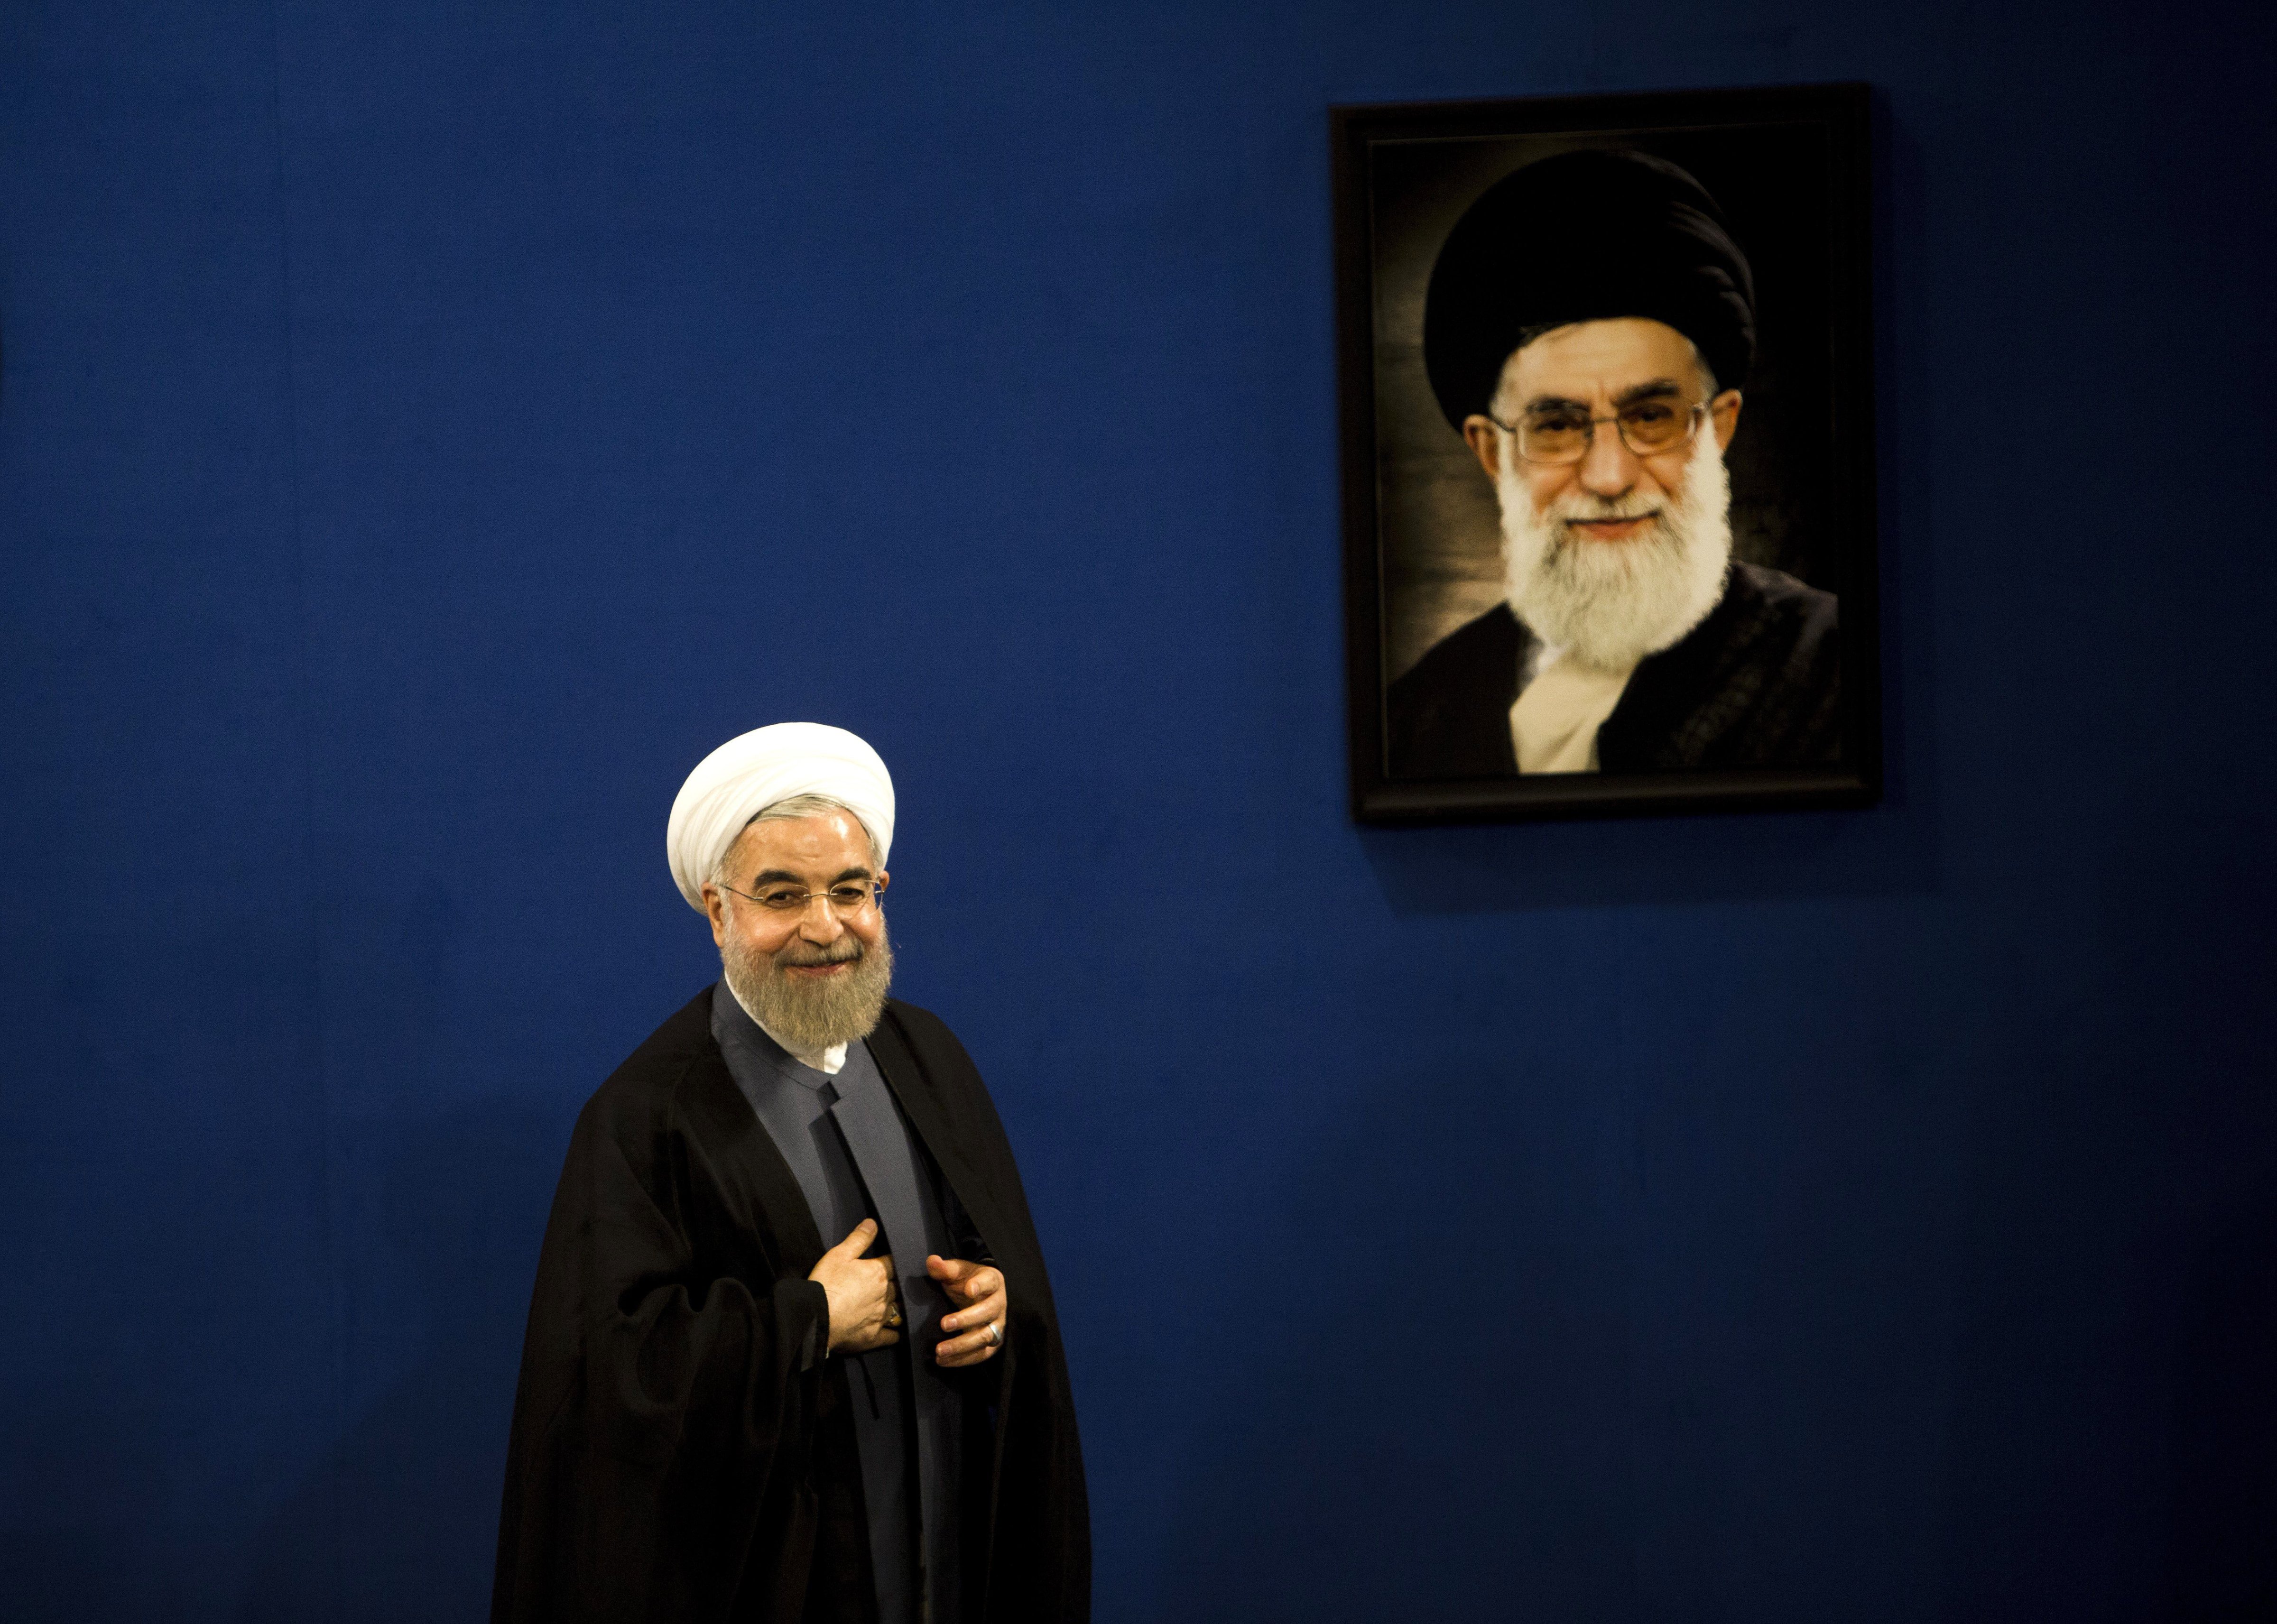 Iranian President Hassan Rouhani stands next to a portrait of supreme leader Ayatollah Ali Khamenei in Tehran on June 13, 2015.